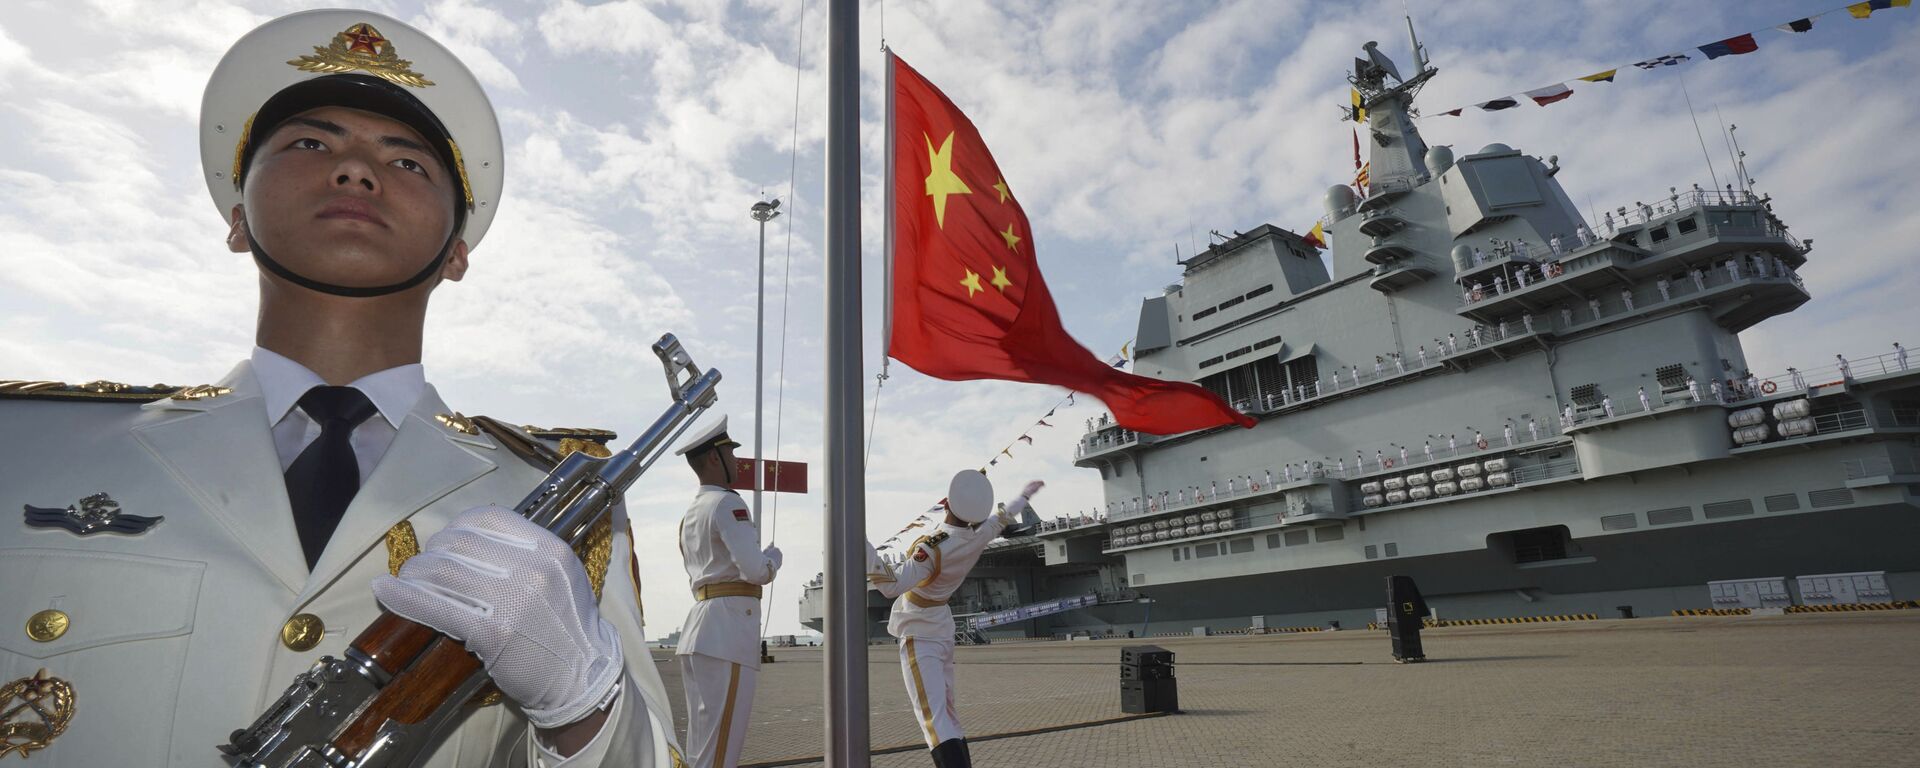 In this photo taken Dec. 17, 2019 and released Dec. 27, 2019 by Xinhua News Agency, Chinese honor guard raise the Chinese flag during the commissioning ceremony of China's Shandong aircraft carrier at a naval port in Sanya, south China's Hainan Province - Sputnik International, 1920, 10.09.2021